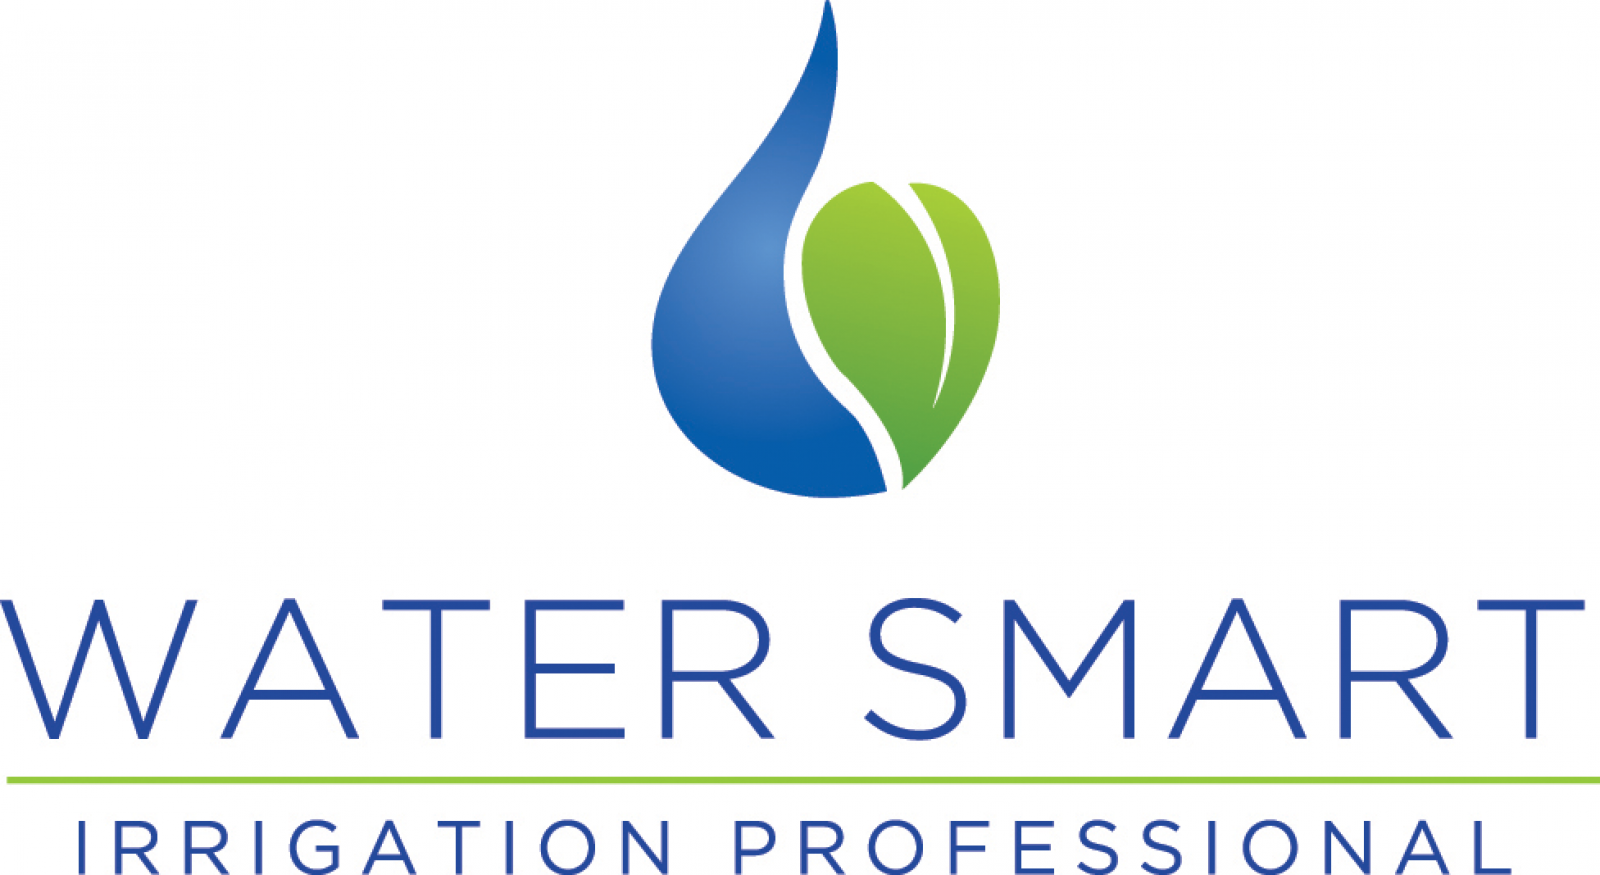 Water Smart Irrigation Professional training offered for 2022